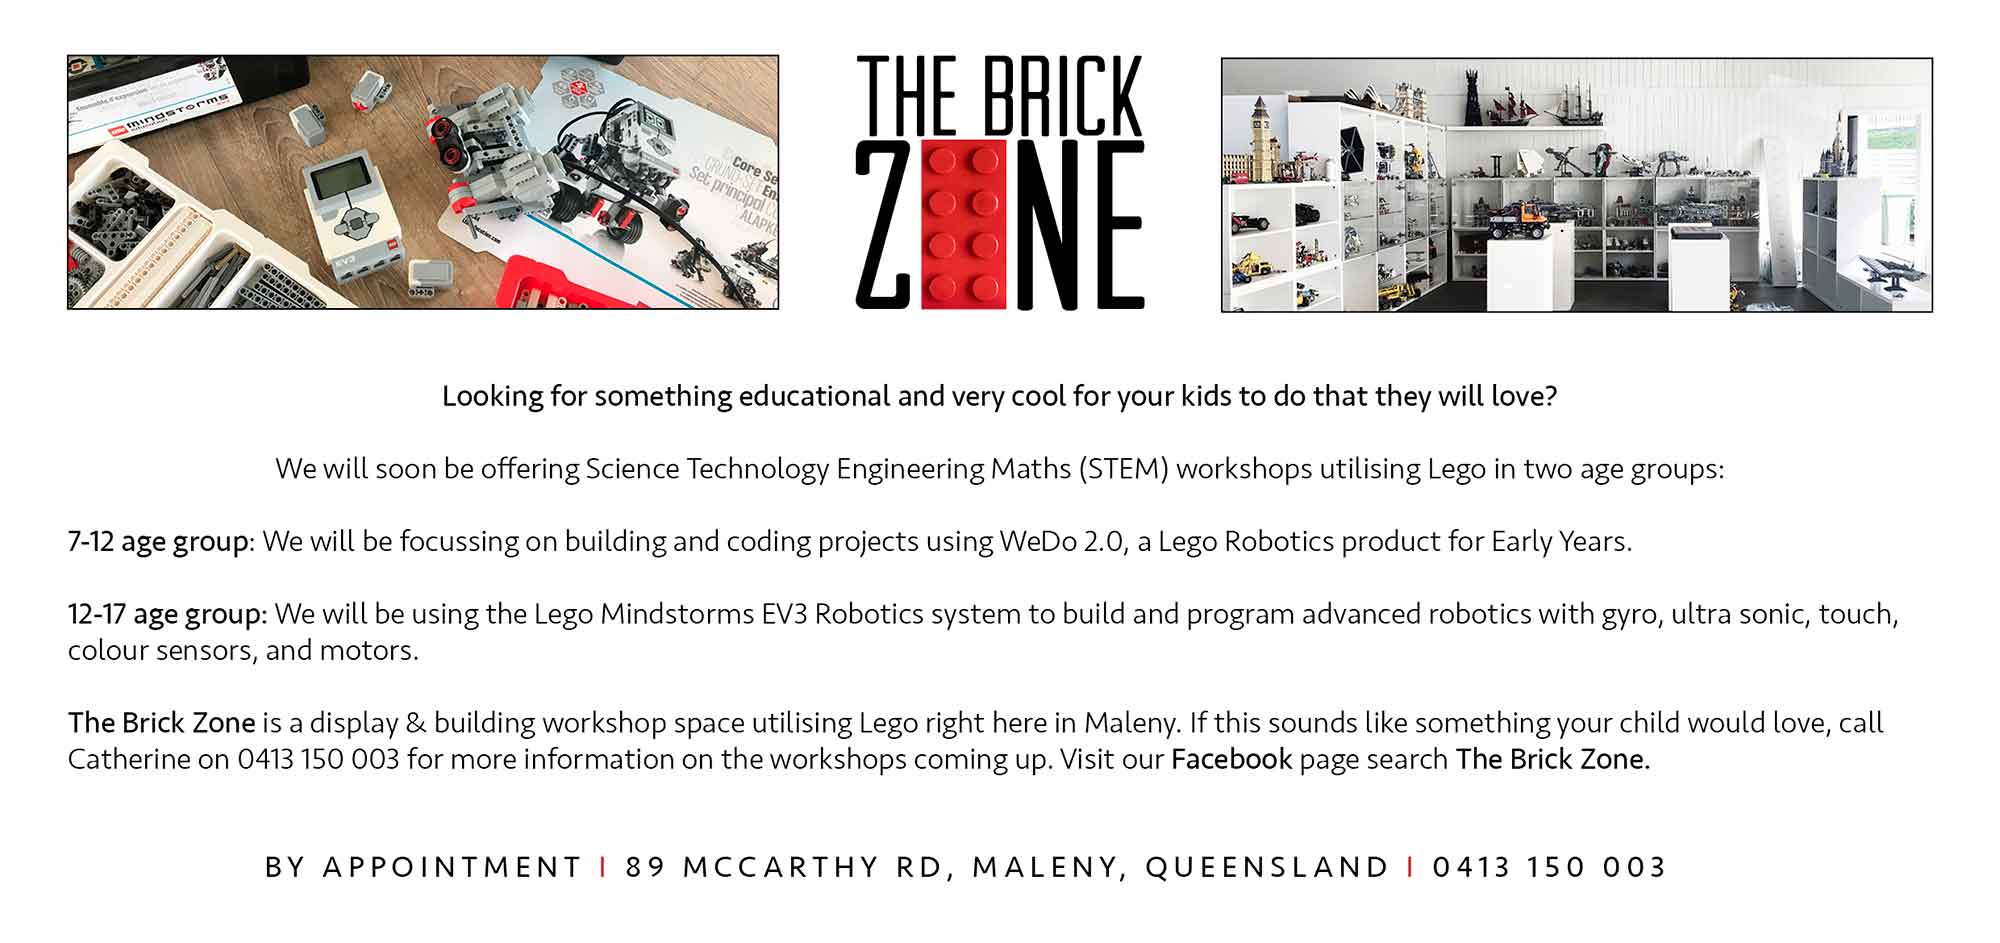 The Brick Zone is Launched